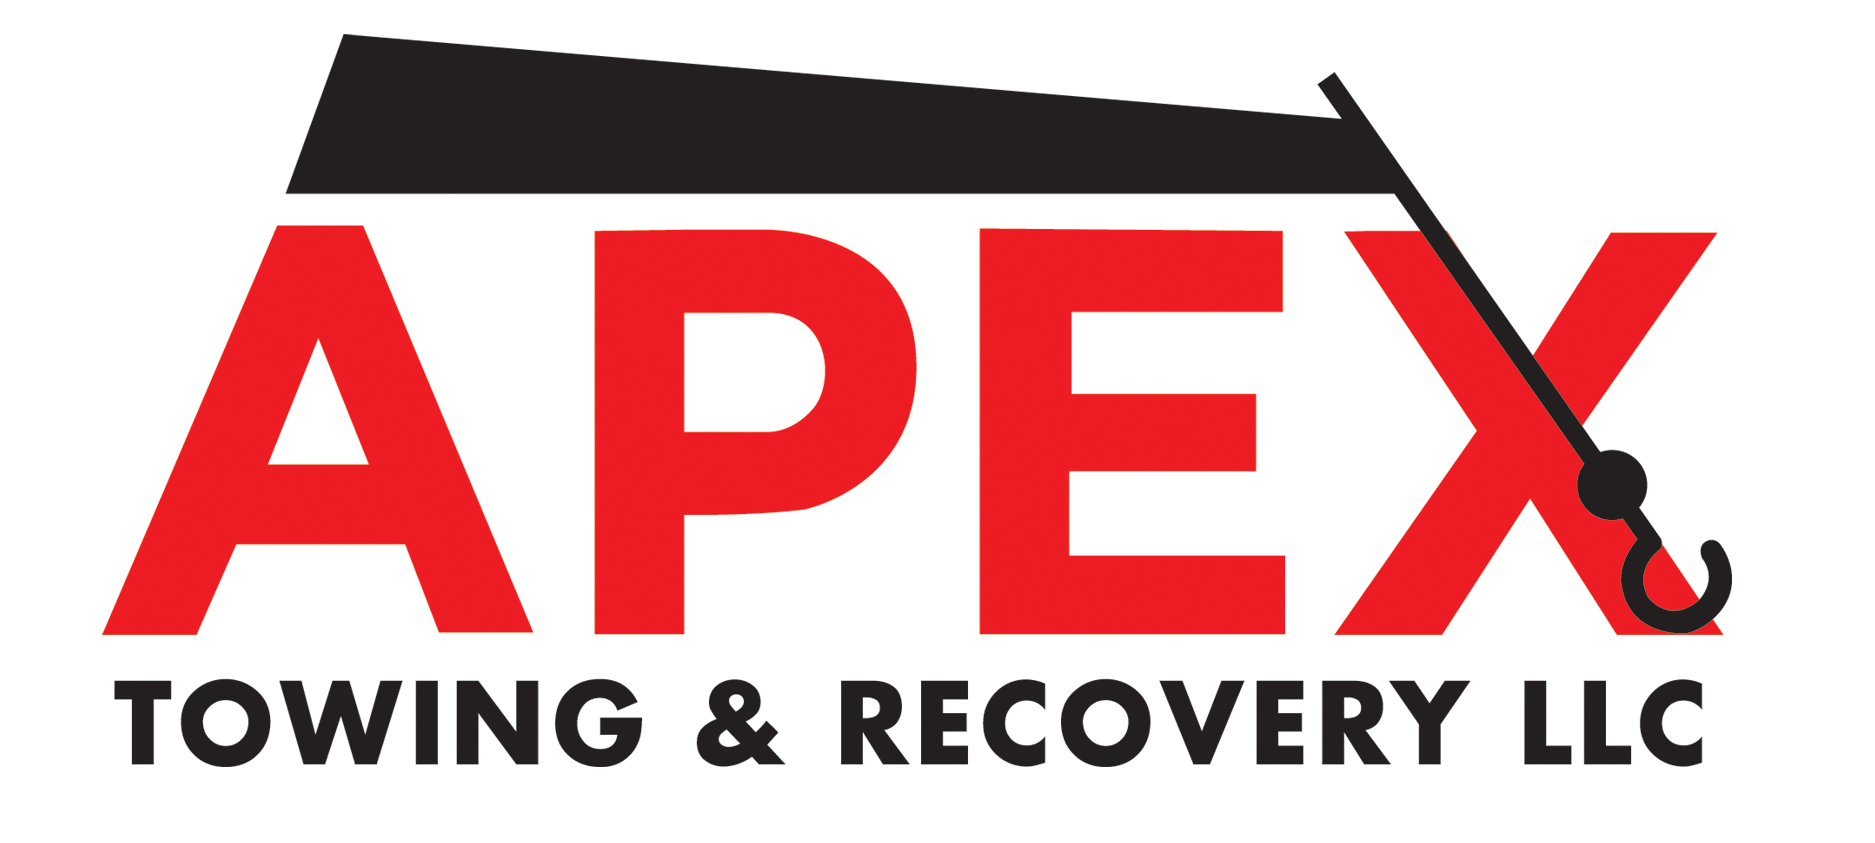 Apex Towing and Recovery LLC logo